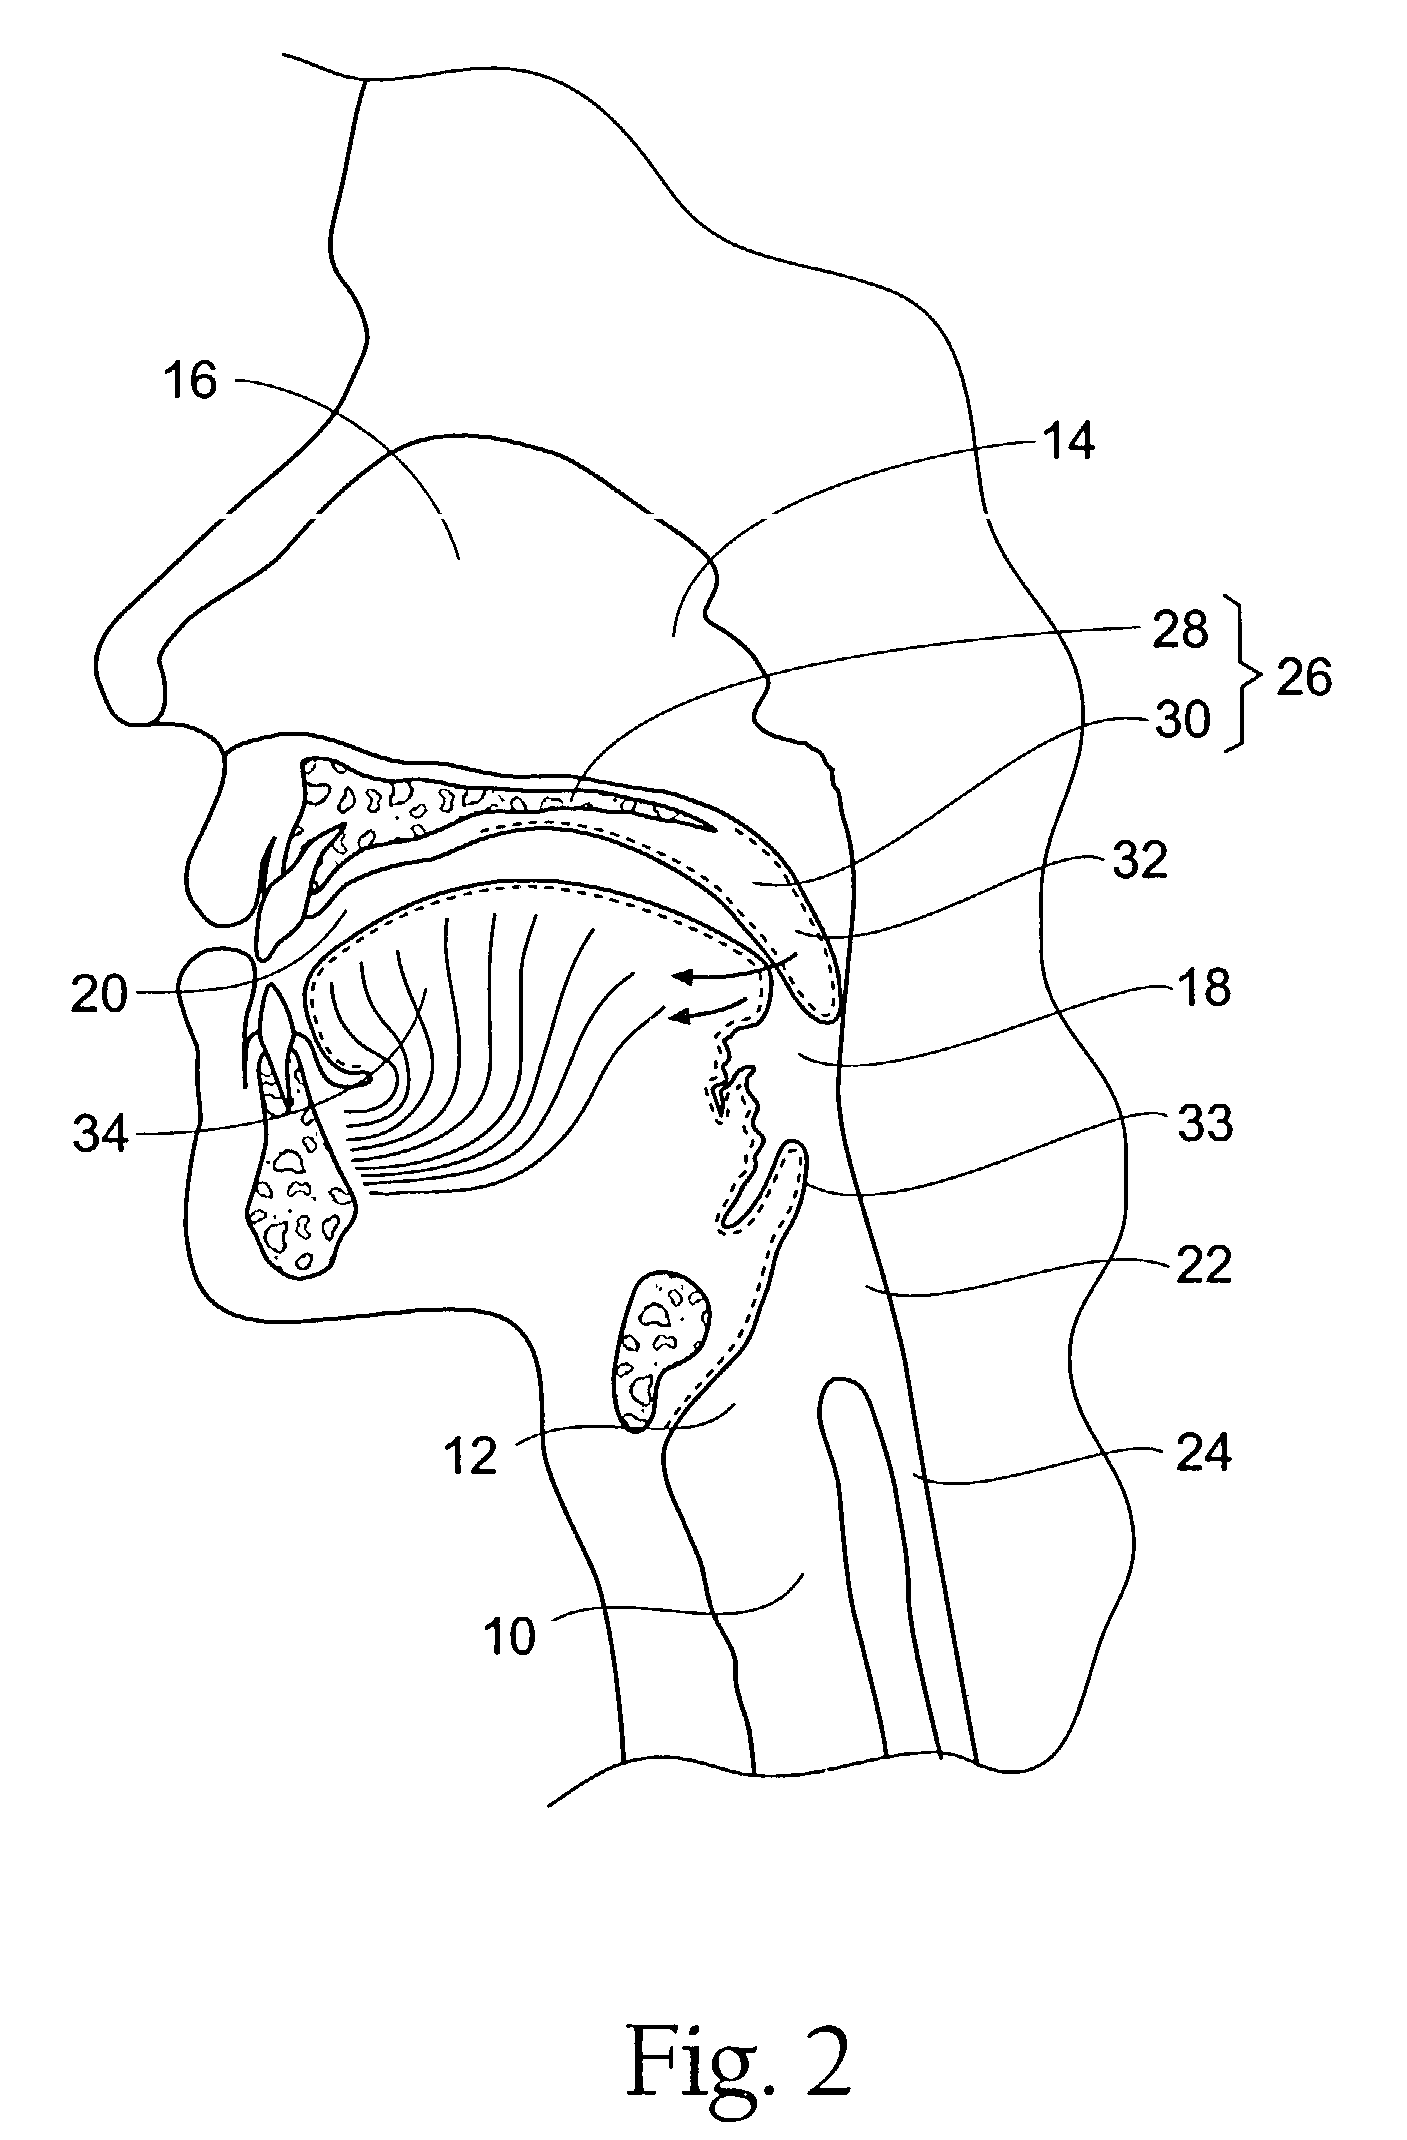 Systems and methods for moving and/or restraining tissue in the upper respiratory system